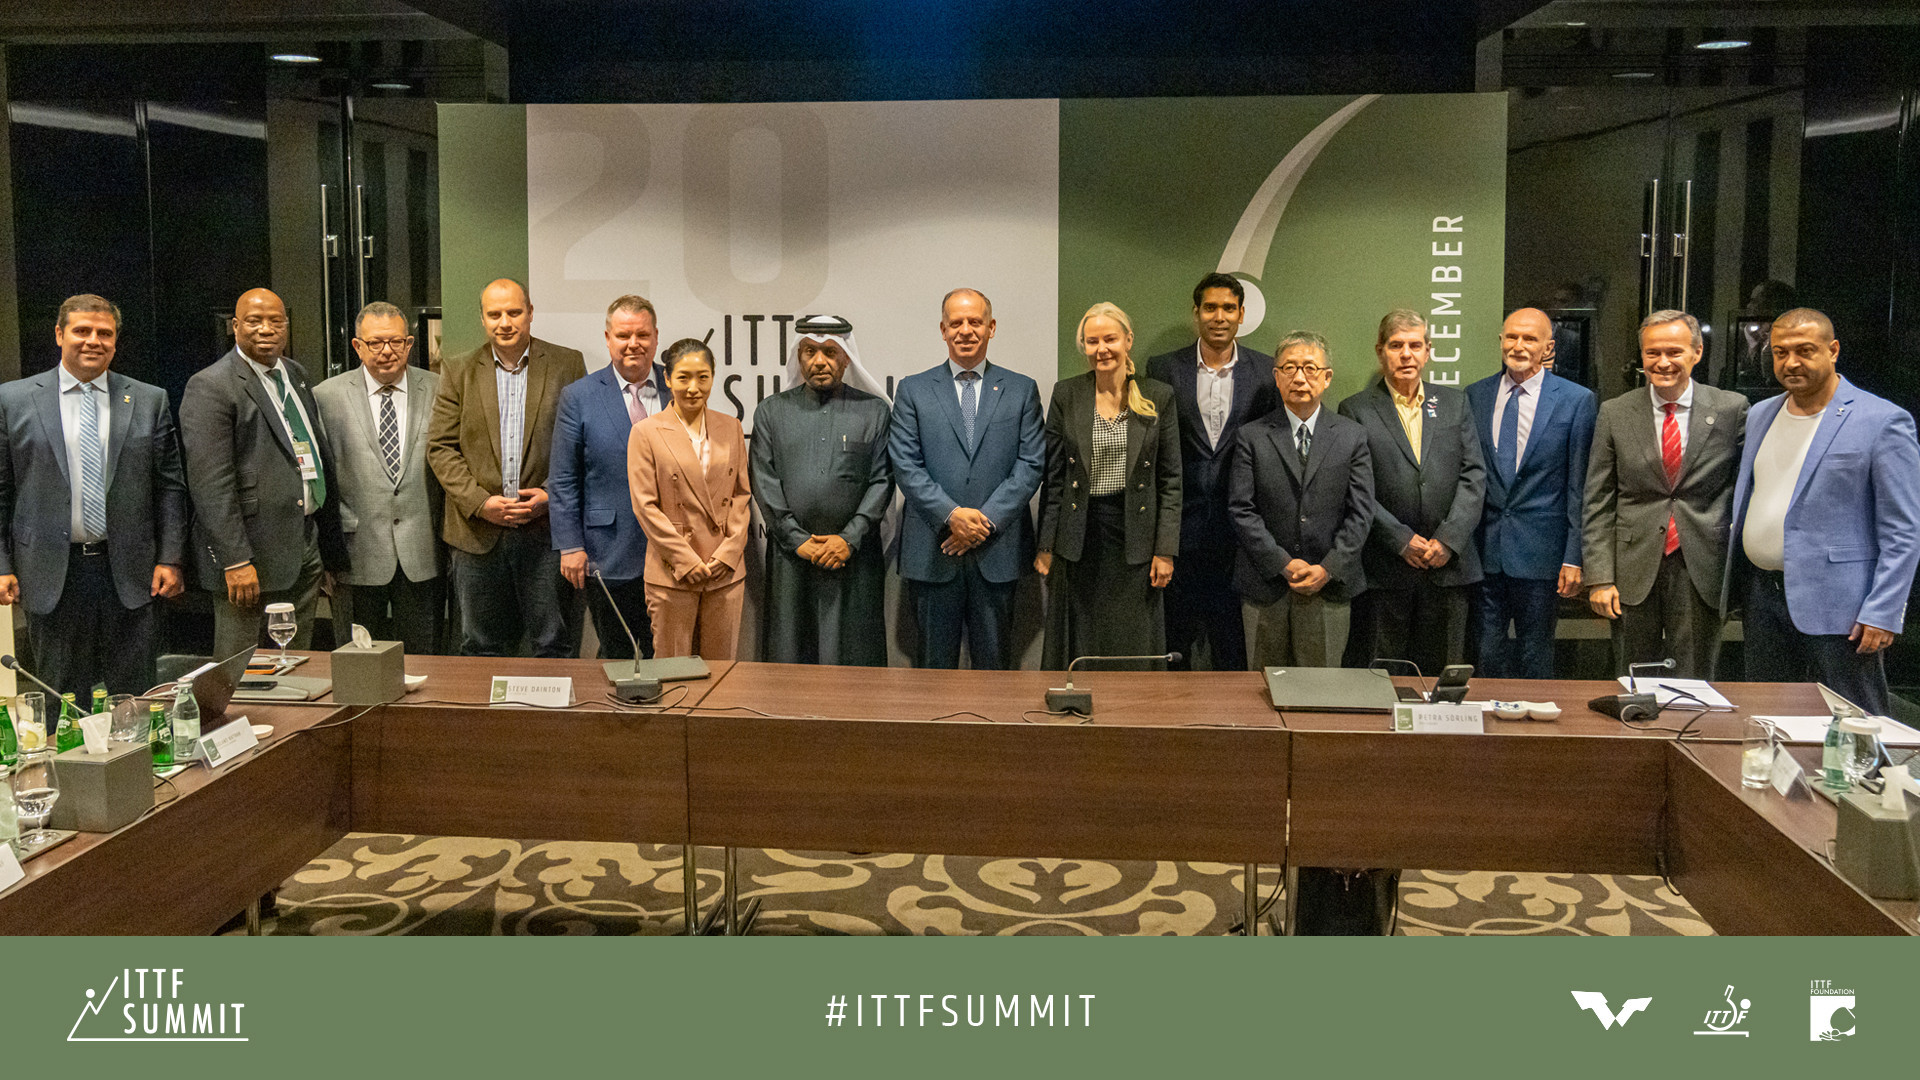 ITTF Executive Committee arrives in Amman for inaugural Summit